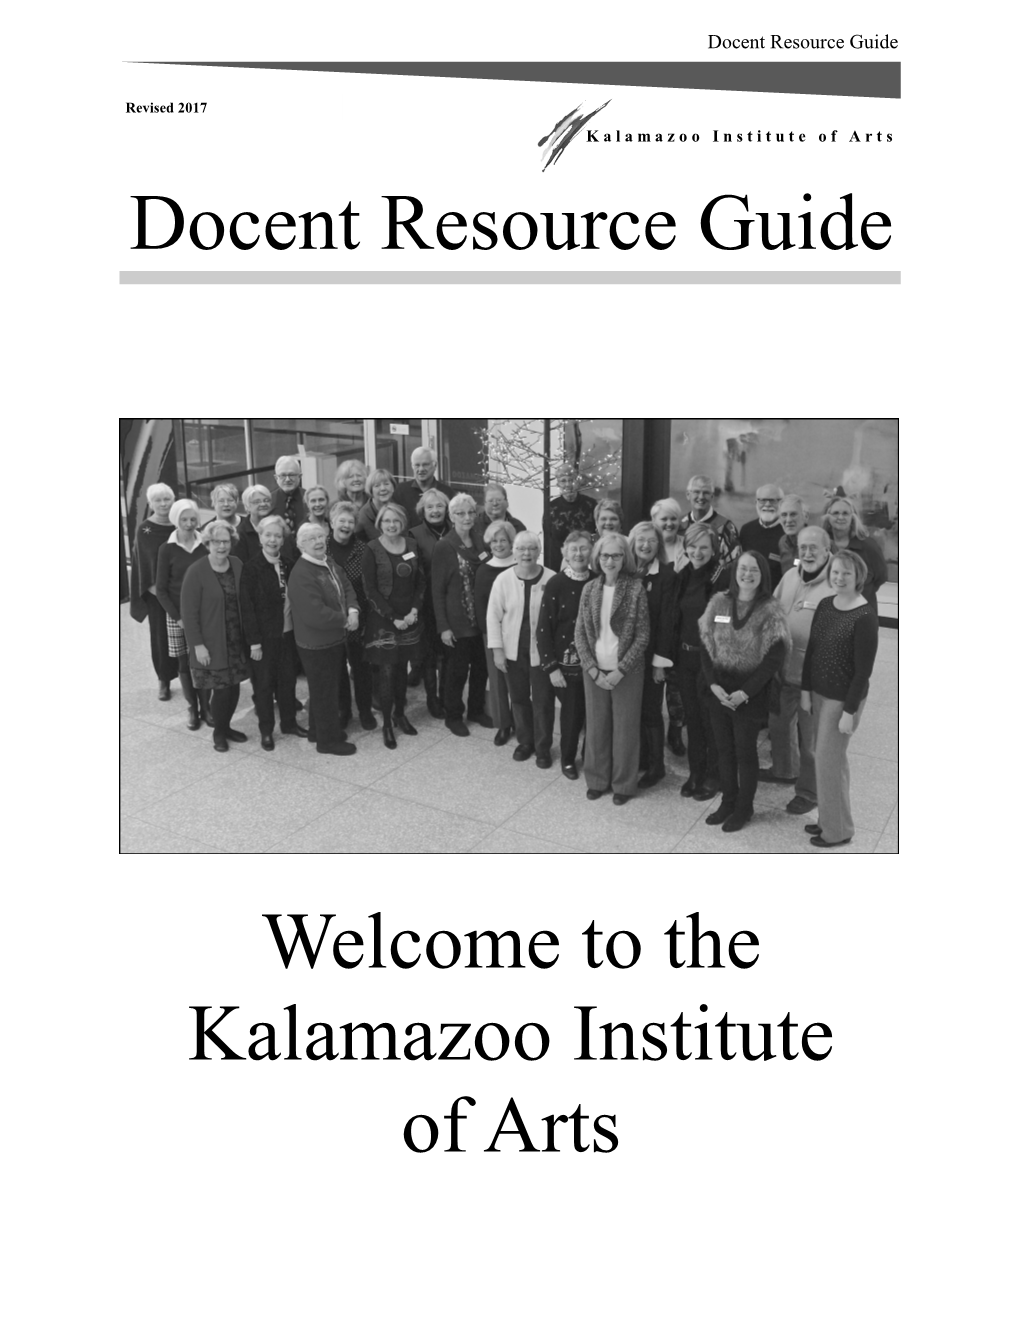 Docent Resource Guide Welcome to the Kalamazoo Institute of Arts